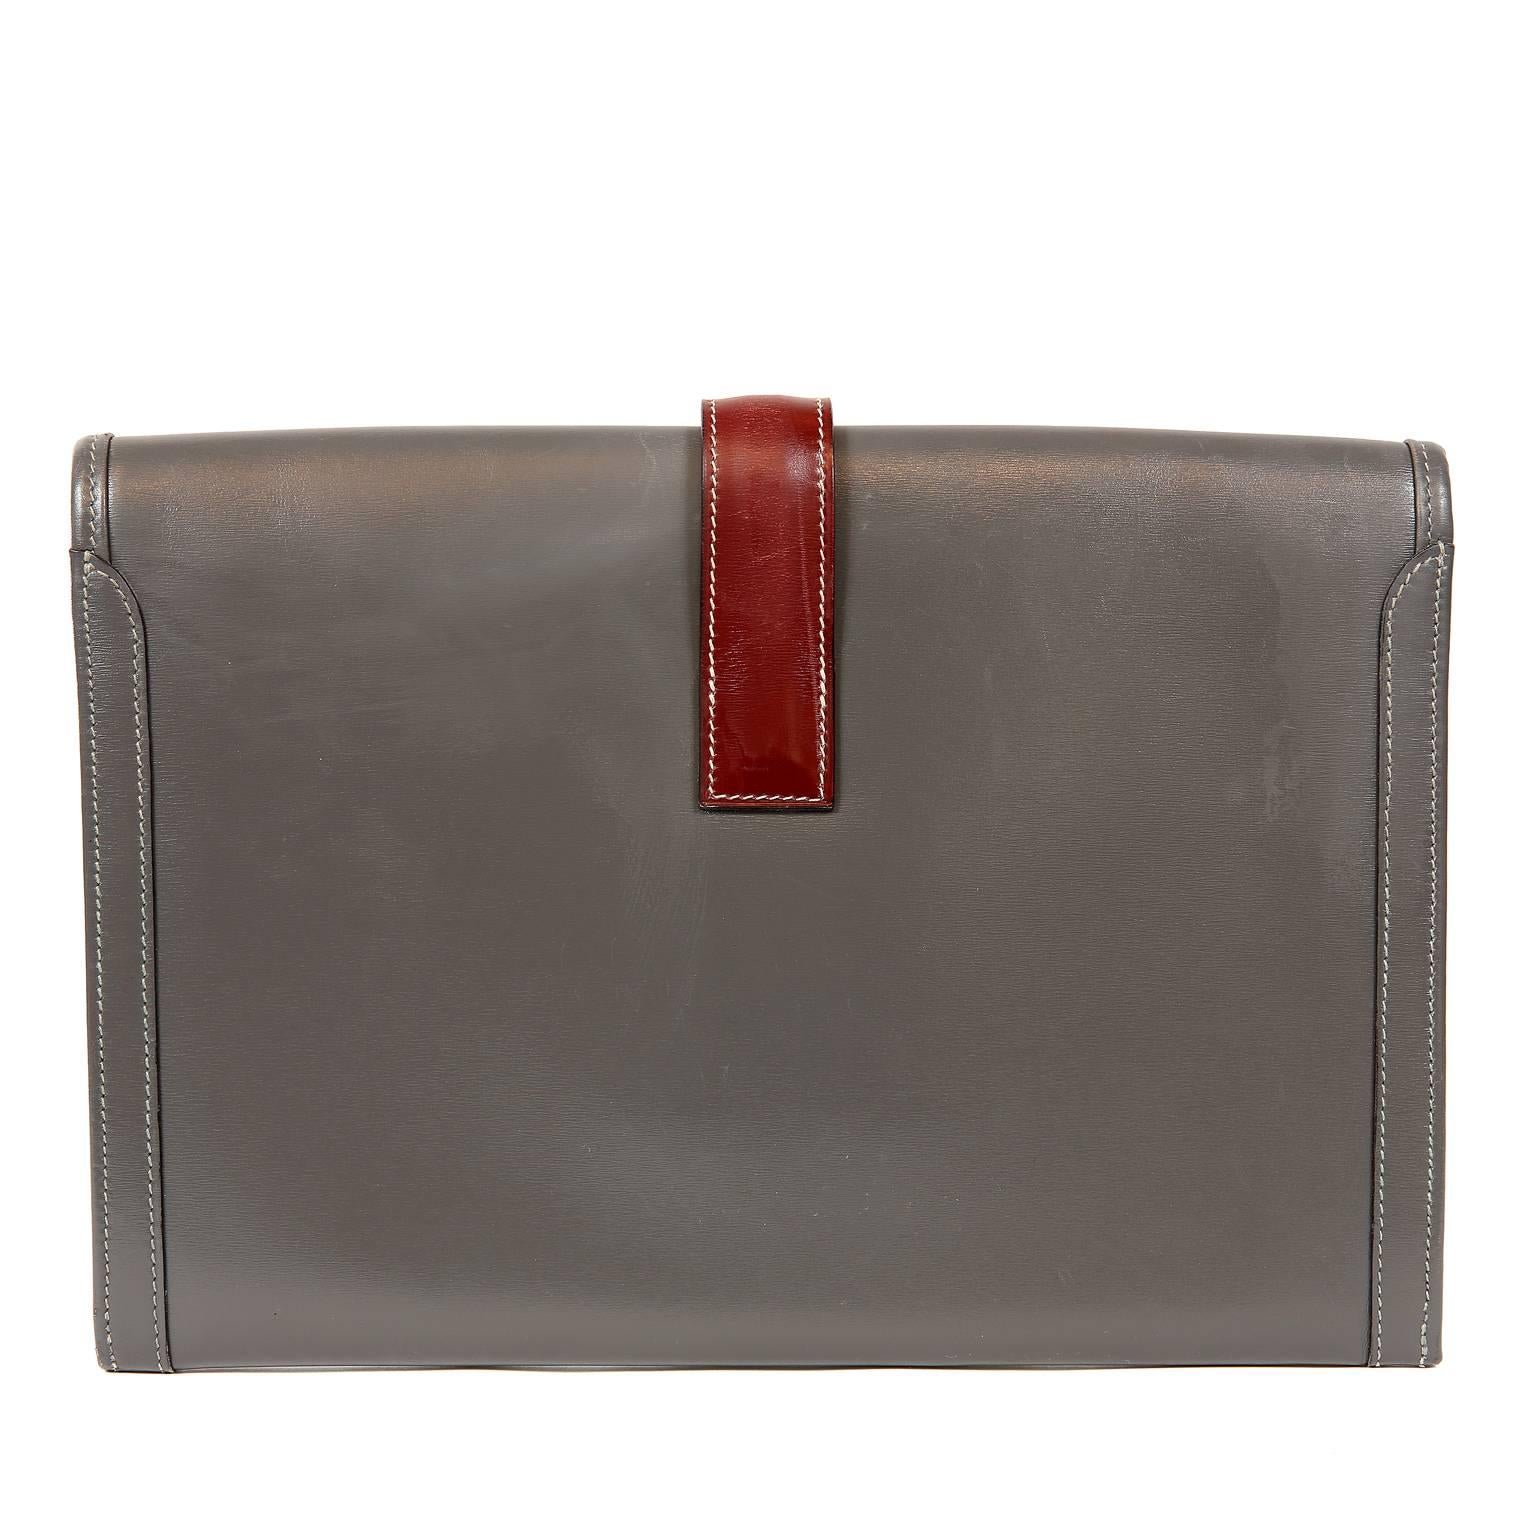  Hermès Grey and Bordeaux Leather Jige Clutch- Very Good Vintage Condition
From the mid 80’s, this classic vintage Hermès has some light scuffs and scratches.  Please review photos. 
Grey leather slim clutch has contrasting burgundy leather H belted